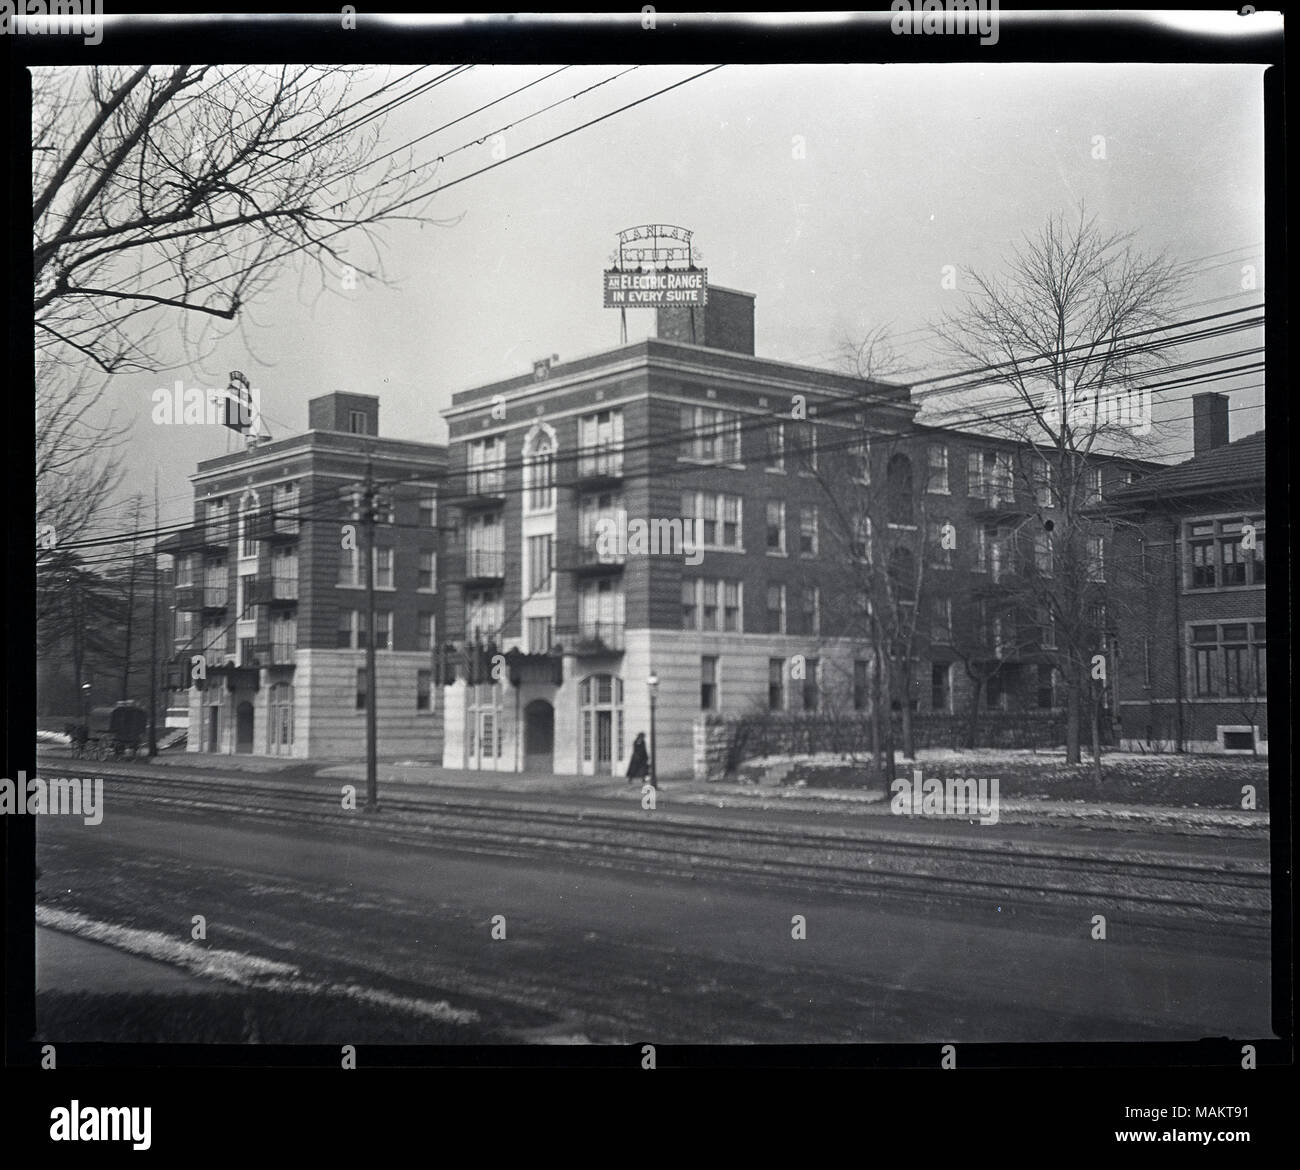 Horizontal, black and white photograph showing the two wings of the Harlan Court apartment building located at 5457 Delmar Boulevard. The apartment building has two four-story wings built of brick and stone. A sign that reads 'Harlan Court/An Electric Range in Every Suite' is on the roof of each wing. Metal balconies and a metal canopy on the front facade of the building can also be seen. The view was taken at an angle from across the street and shows the streetcar rails in the middle of the road. A horse pulling a covered cart can be seen in the distance on the left. Title: Harlan Court Apart Stock Photo